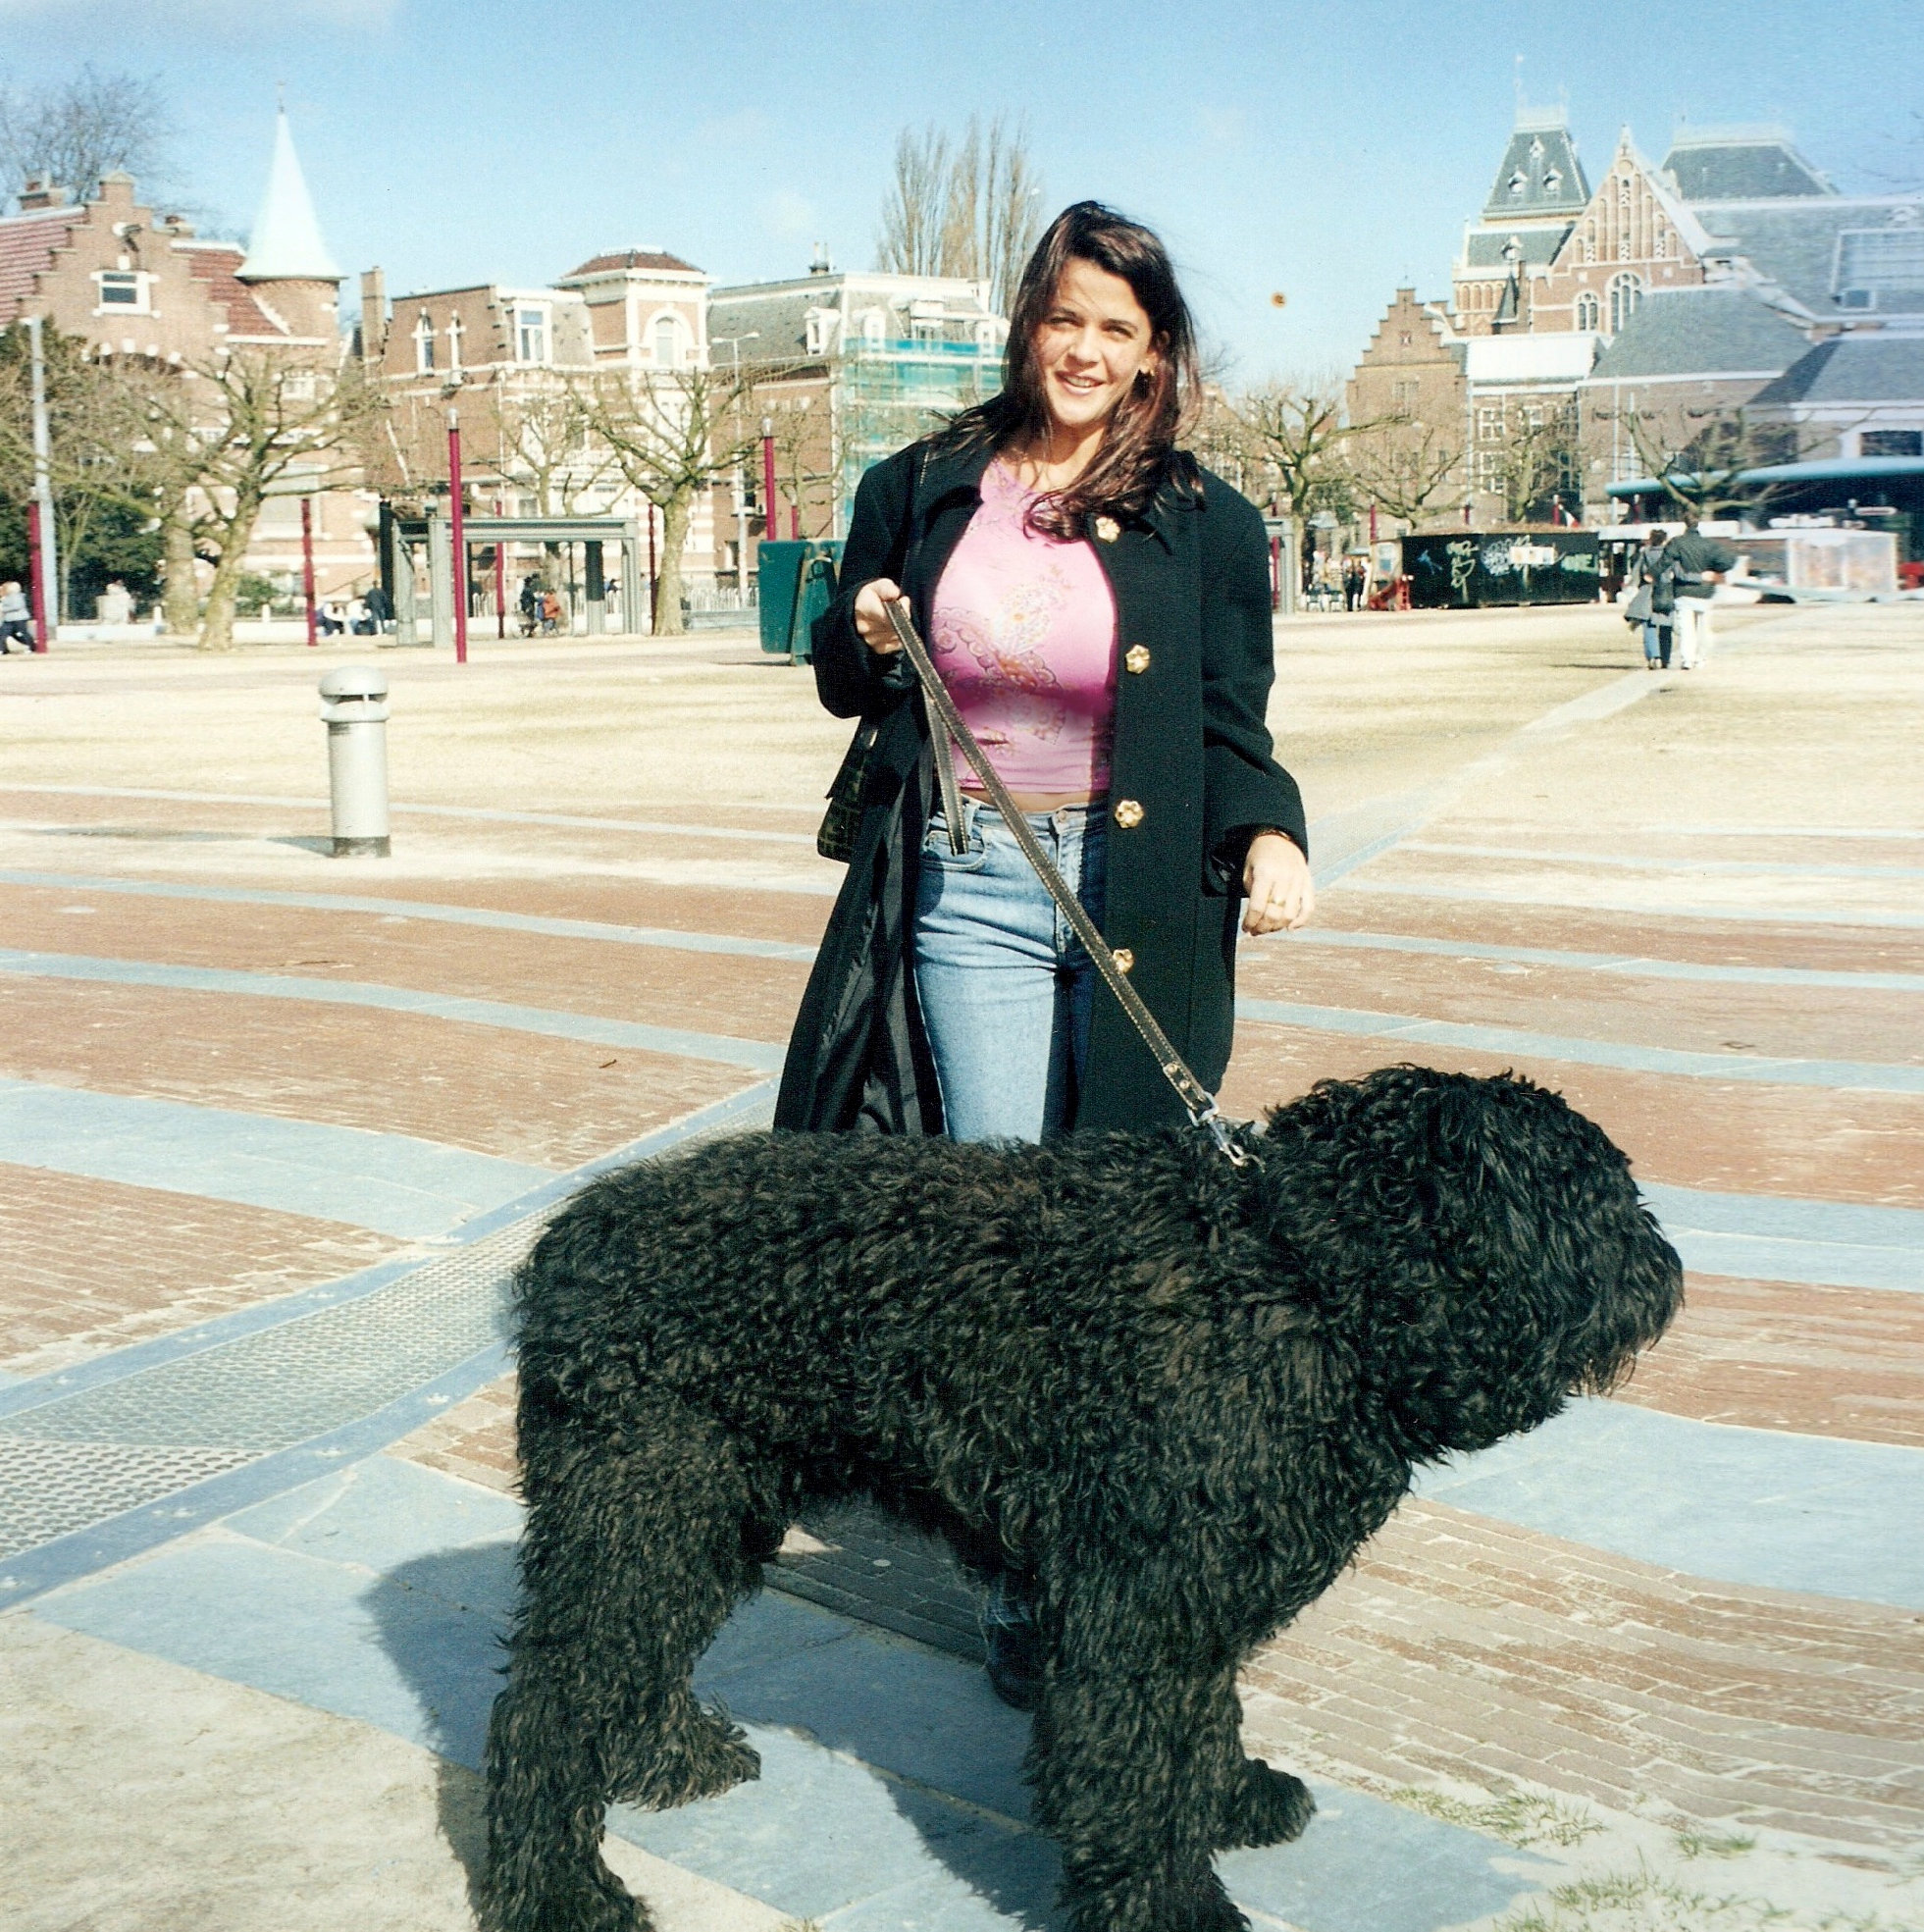 Downtown Amsterdam and a woman holding a big black cute dog